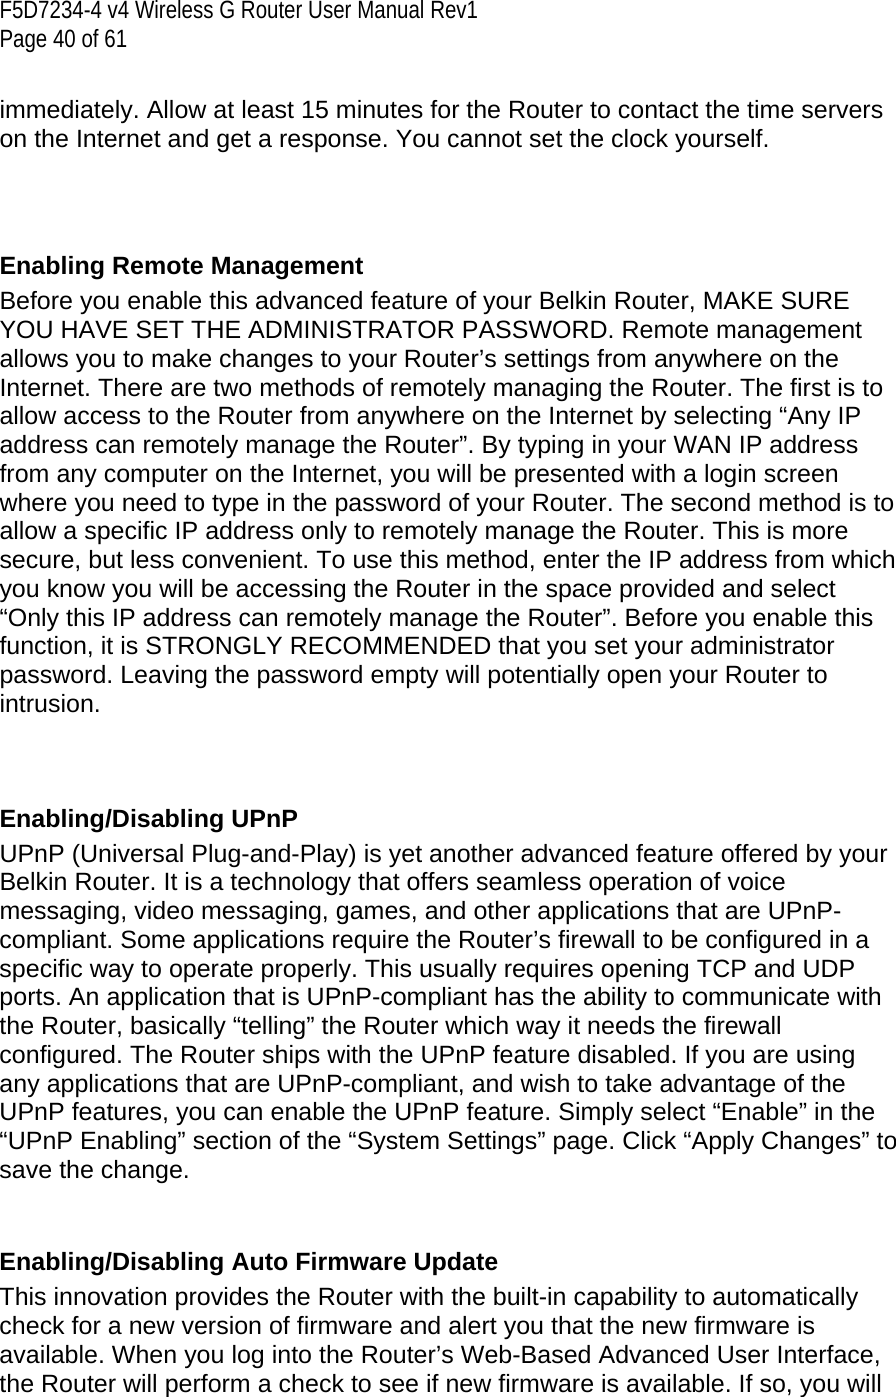 F5D7234-4 v4 Wireless G Router User Manual Rev1  Page 40 of 61   immediately. Allow at least 15 minutes for the Router to contact the time servers on the Internet and get a response. You cannot set the clock yourself.     Enabling Remote Management Before you enable this advanced feature of your Belkin Router, MAKE SURE YOU HAVE SET THE ADMINISTRATOR PASSWORD. Remote management allows you to make changes to your Router’s settings from anywhere on the Internet. There are two methods of remotely managing the Router. The first is to allow access to the Router from anywhere on the Internet by selecting “Any IP address can remotely manage the Router”. By typing in your WAN IP address from any computer on the Internet, you will be presented with a login screen where you need to type in the password of your Router. The second method is to allow a specific IP address only to remotely manage the Router. This is more secure, but less convenient. To use this method, enter the IP address from which you know you will be accessing the Router in the space provided and select “Only this IP address can remotely manage the Router”. Before you enable this function, it is STRONGLY RECOMMENDED that you set your administrator password. Leaving the password empty will potentially open your Router to intrusion.     Enabling/Disabling UPnP UPnP (Universal Plug-and-Play) is yet another advanced feature offered by your Belkin Router. It is a technology that offers seamless operation of voice messaging, video messaging, games, and other applications that are UPnP-compliant. Some applications require the Router’s firewall to be configured in a specific way to operate properly. This usually requires opening TCP and UDP ports. An application that is UPnP-compliant has the ability to communicate with the Router, basically “telling” the Router which way it needs the firewall configured. The Router ships with the UPnP feature disabled. If you are using any applications that are UPnP-compliant, and wish to take advantage of the UPnP features, you can enable the UPnP feature. Simply select “Enable” in the “UPnP Enabling” section of the “System Settings” page. Click “Apply Changes” to save the change.   Enabling/Disabling Auto Firmware Update This innovation provides the Router with the built-in capability to automatically check for a new version of firmware and alert you that the new firmware is available. When you log into the Router’s Web-Based Advanced User Interface, the Router will perform a check to see if new firmware is available. If so, you will 